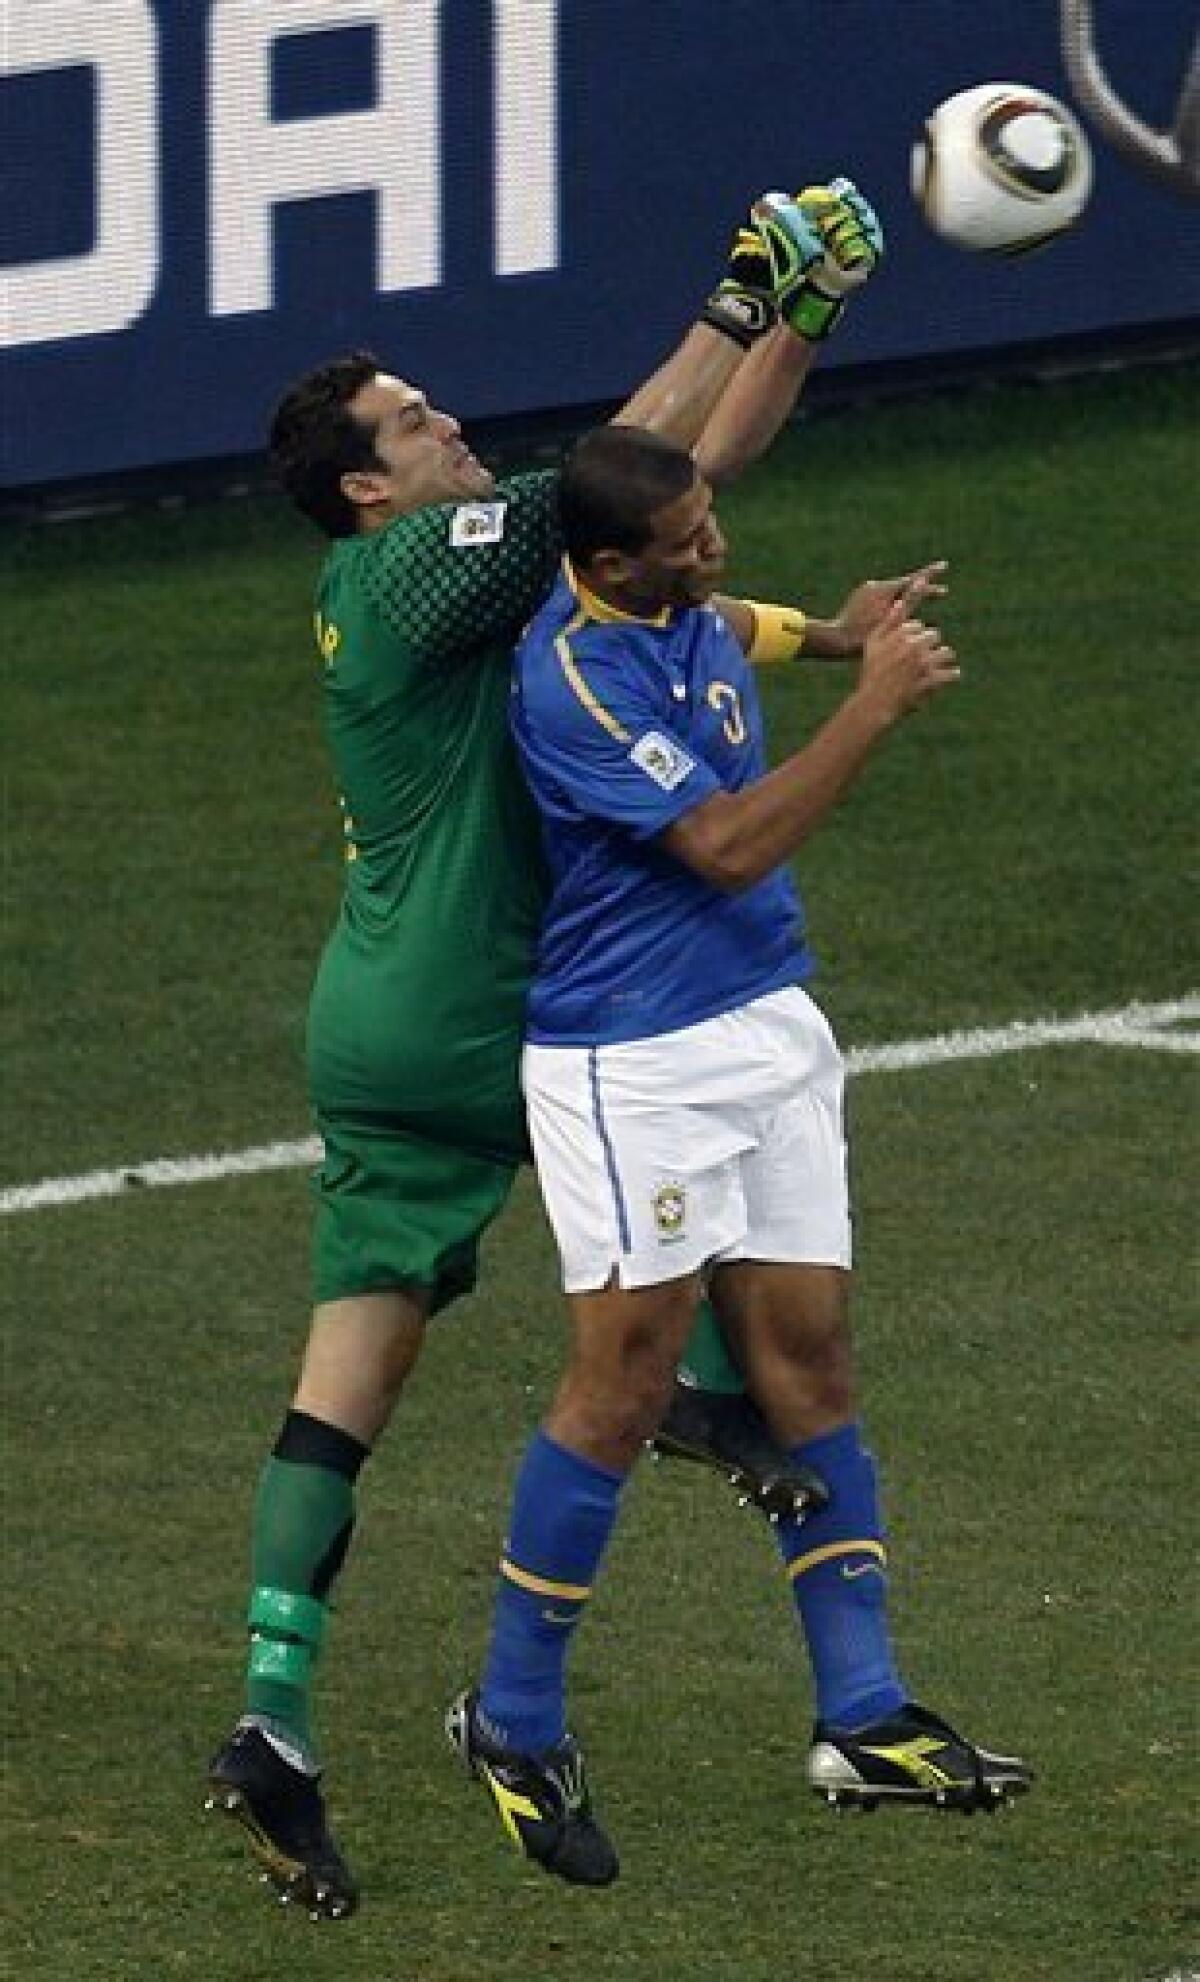 Brazil's Felipe Melo, right, heads the ball past Brazil goalkeeper Julio Cesar, left, before it goes into the net to score an own goal during the World Cup quarterfinal soccer match between the Netherlands and Brazil at Nelson Mandela Bay Stadium in Port Elizabeth, South Africa, Friday, July 2, 2010. (AP Photo/Roberto Candia)